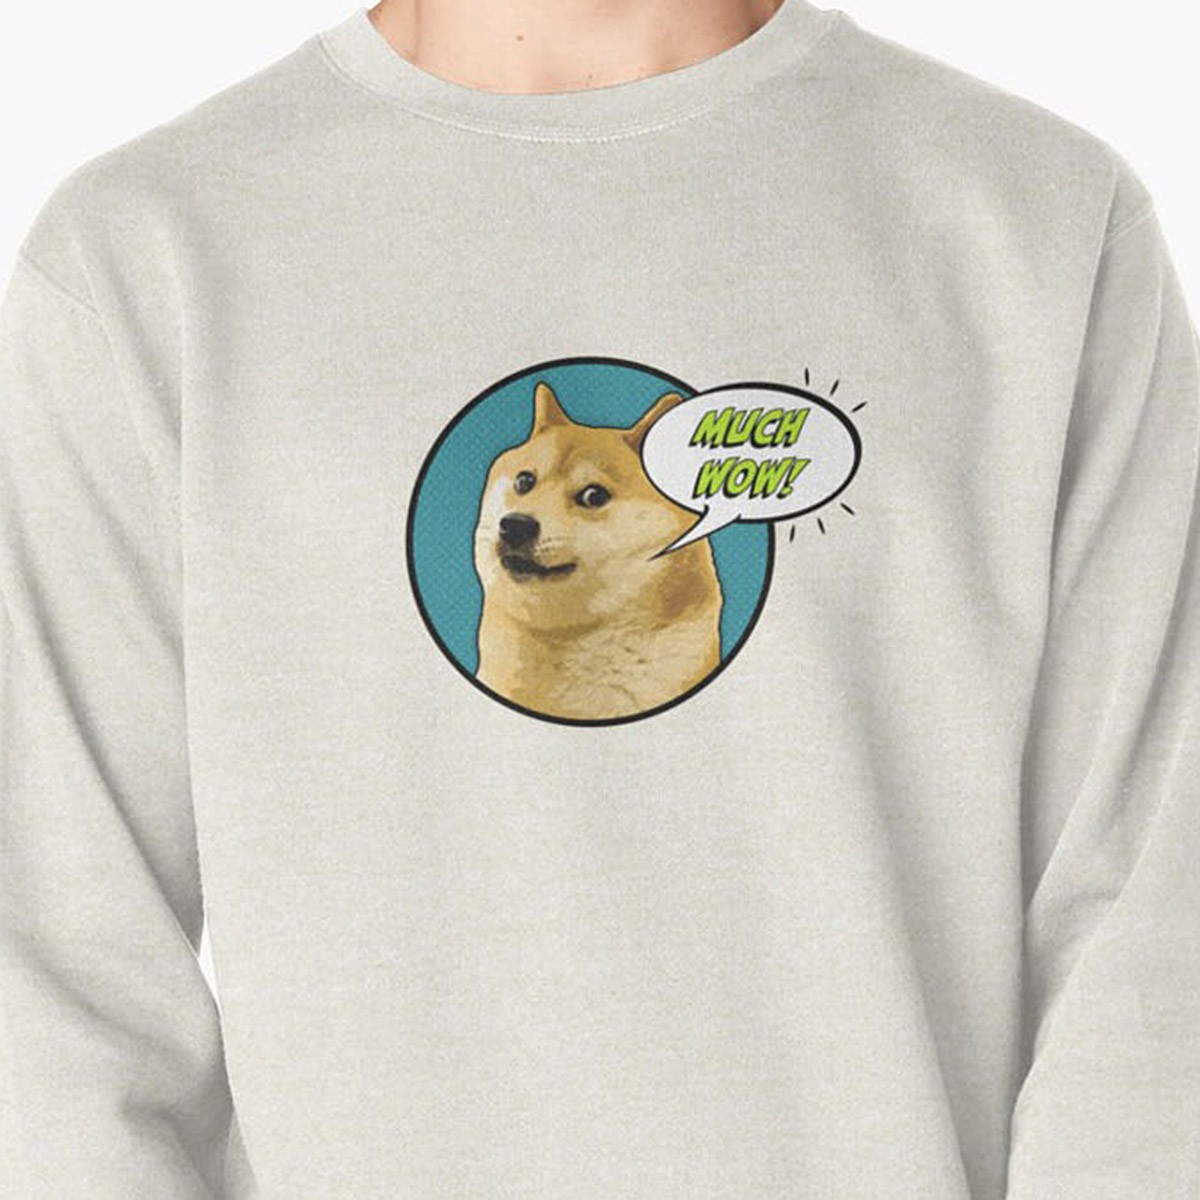 Dogecoin - Much Wow!! Pullover Sweatshirt by NTK Apparel